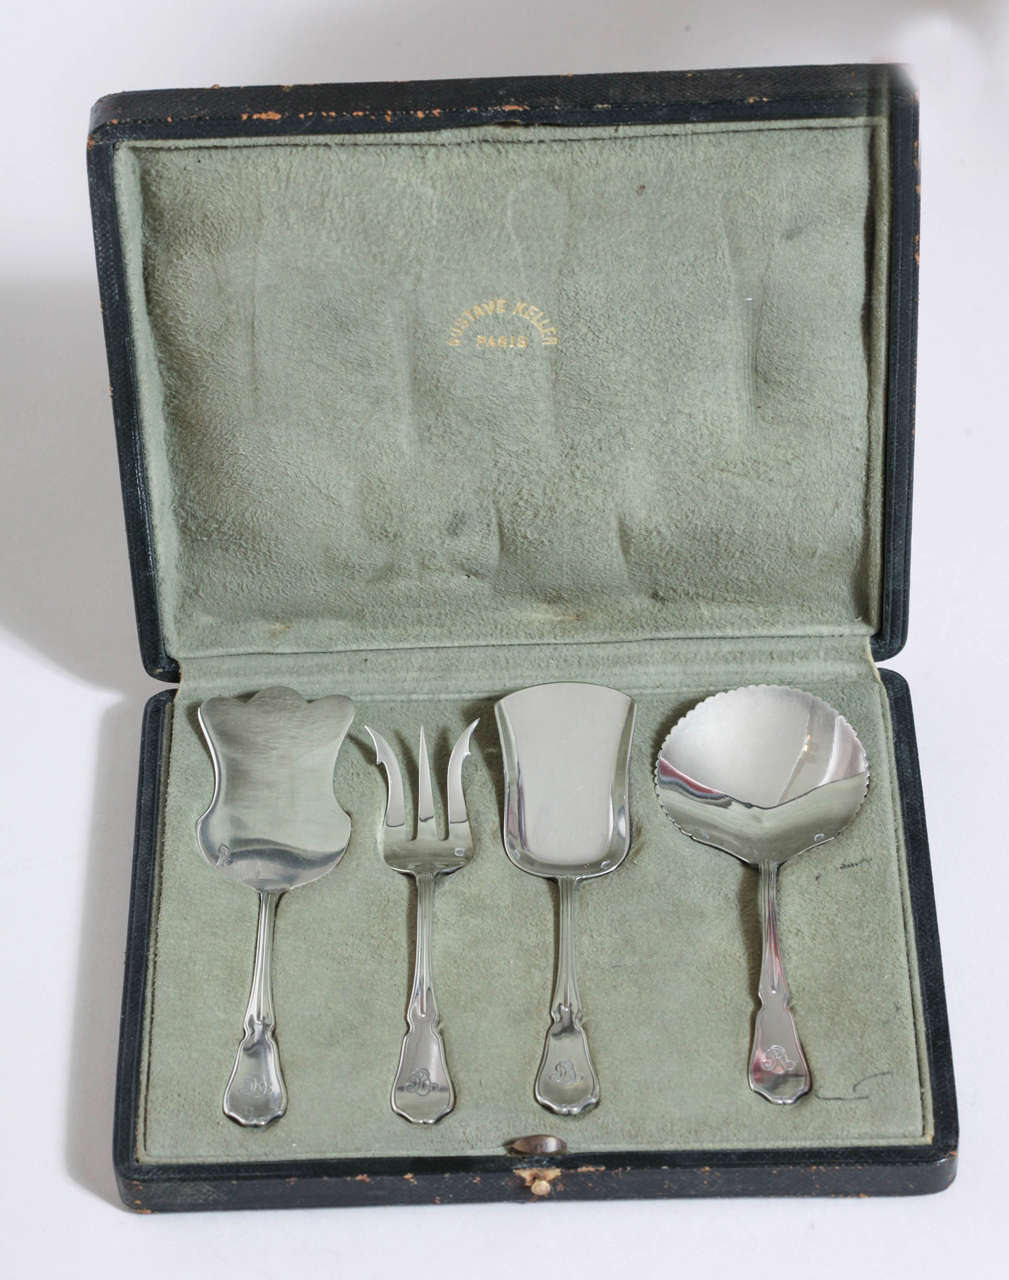 Four-piece sterling silver set includes a fork, serrated spoon, scoop, and a spade. 
Each 5' to 5.25' long. 
Monogrammed RD.

Hallmarked for 950 silver/ G Keller/ Keller poincon.

